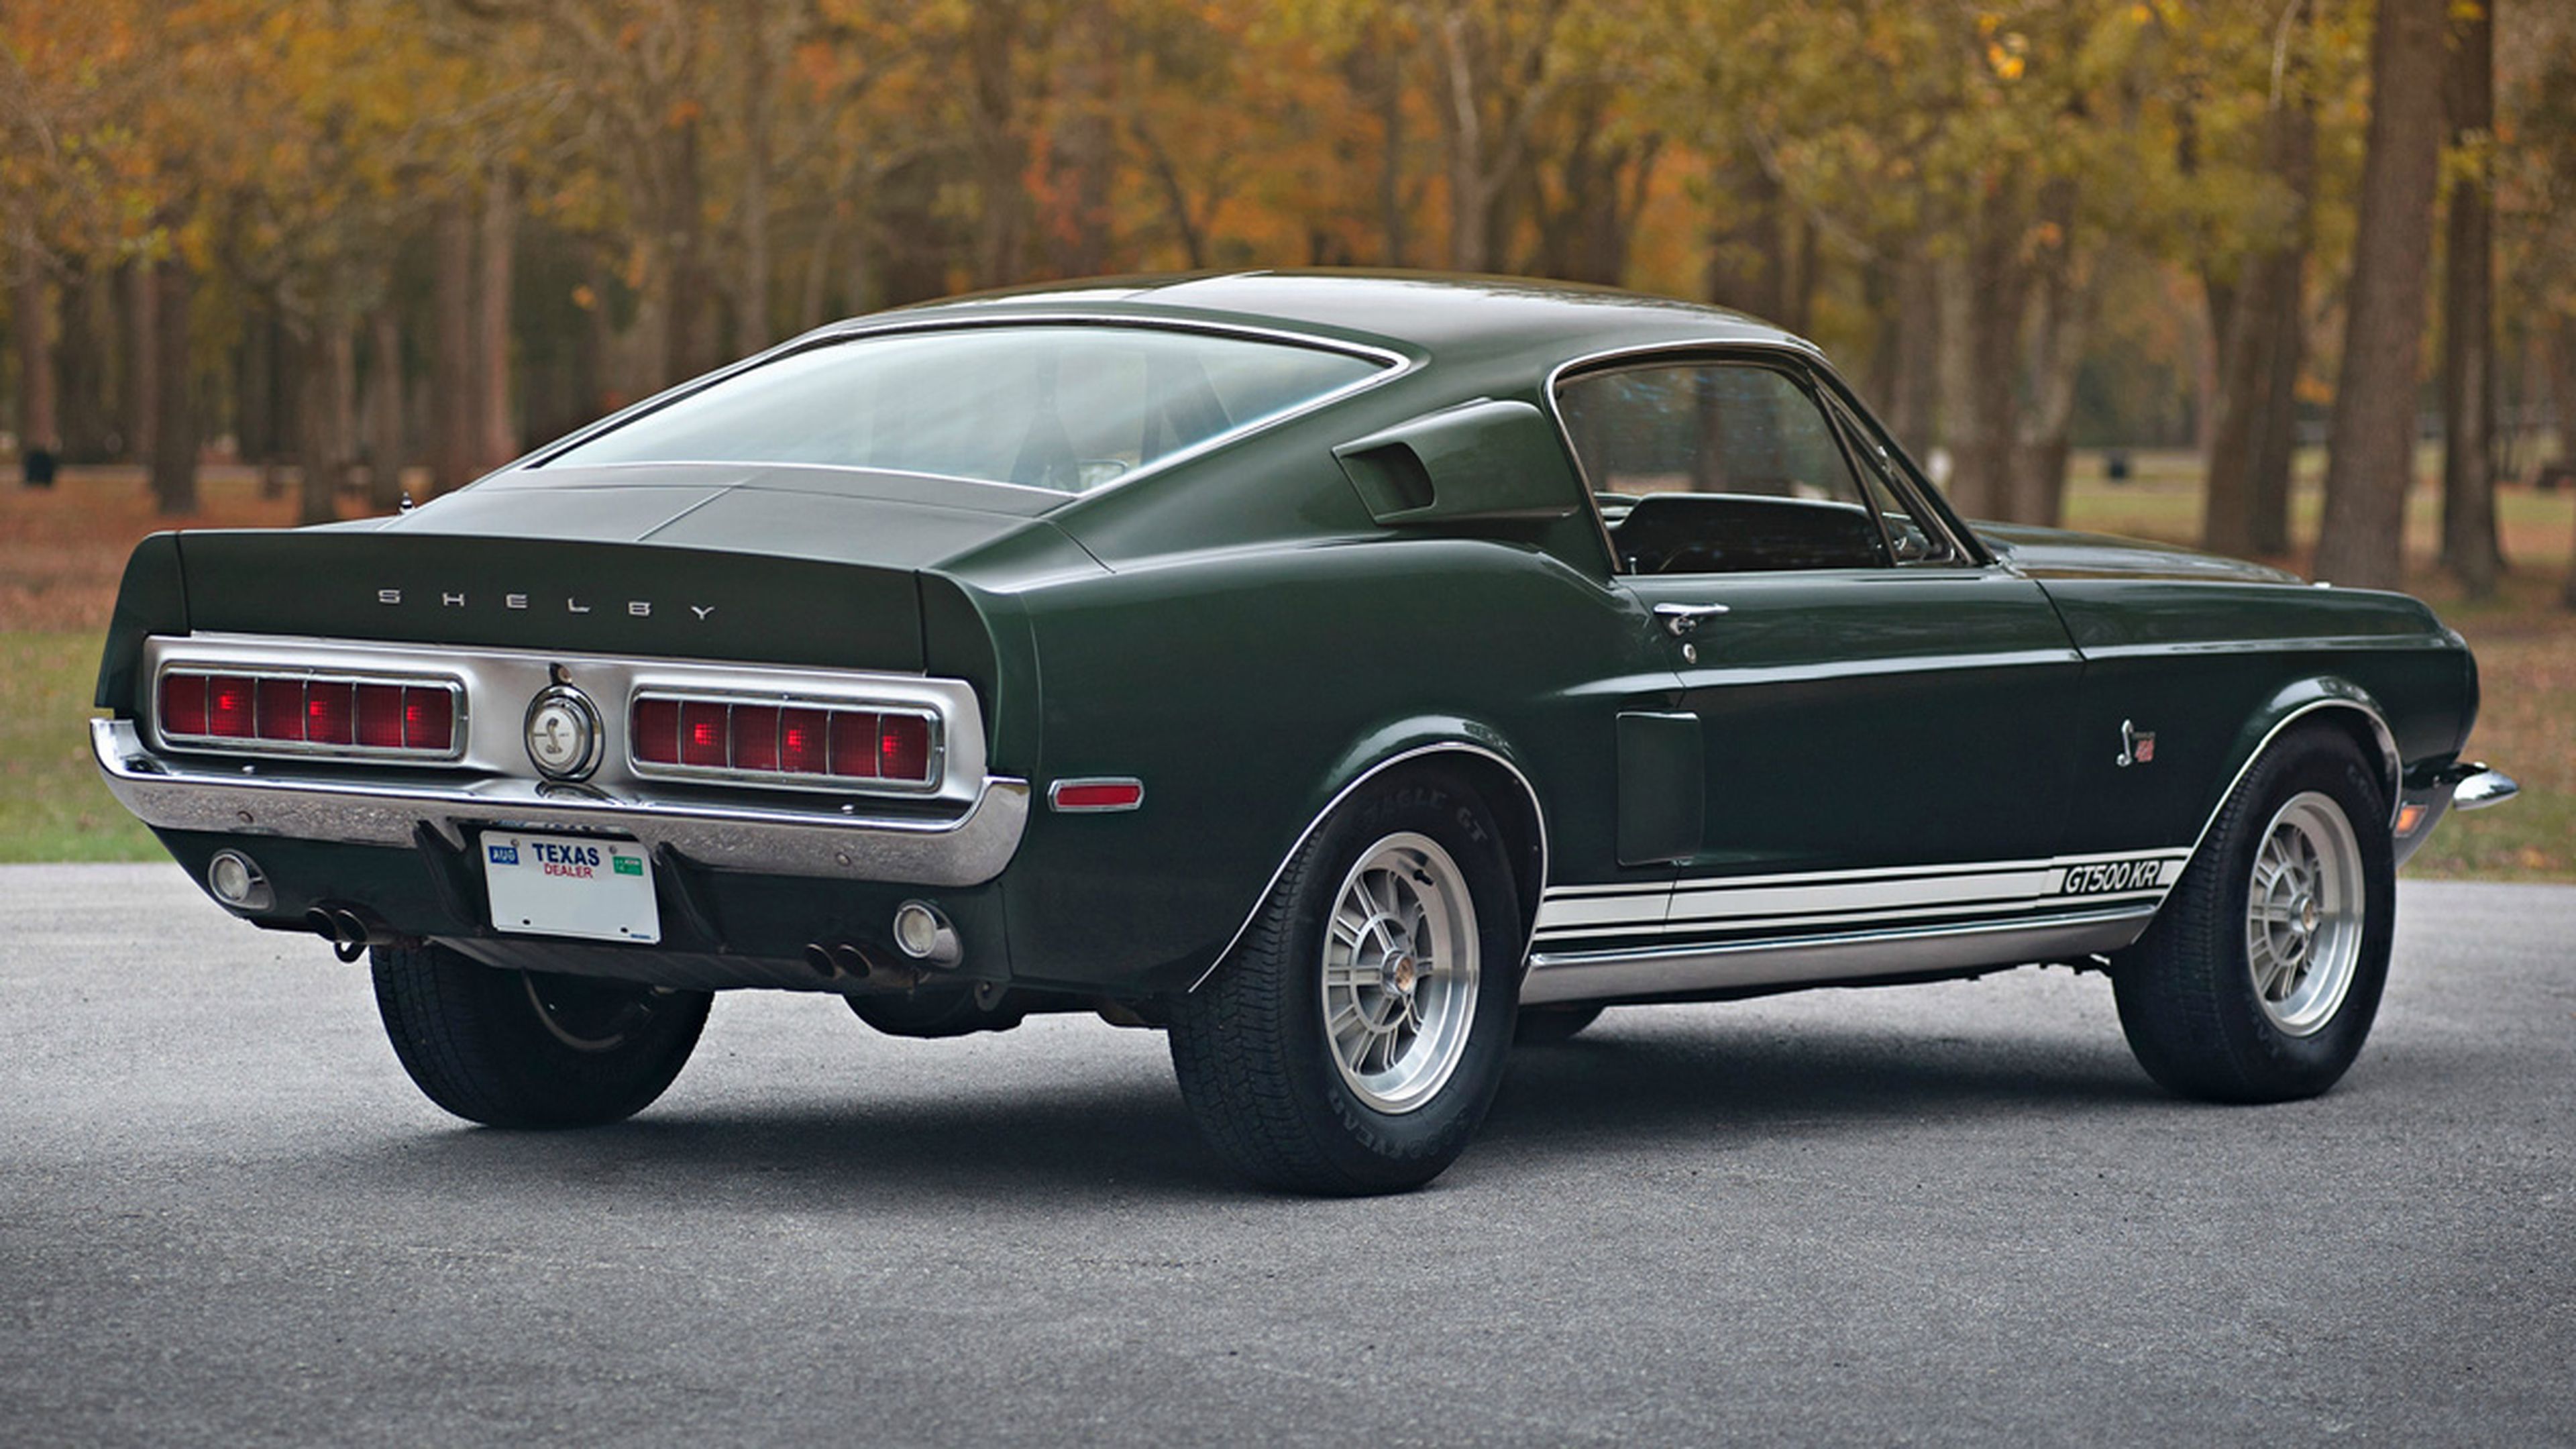 mejores-clasicos-deportivos-americanos-Ford-Mustang Shelby-GT500-KR-zaga